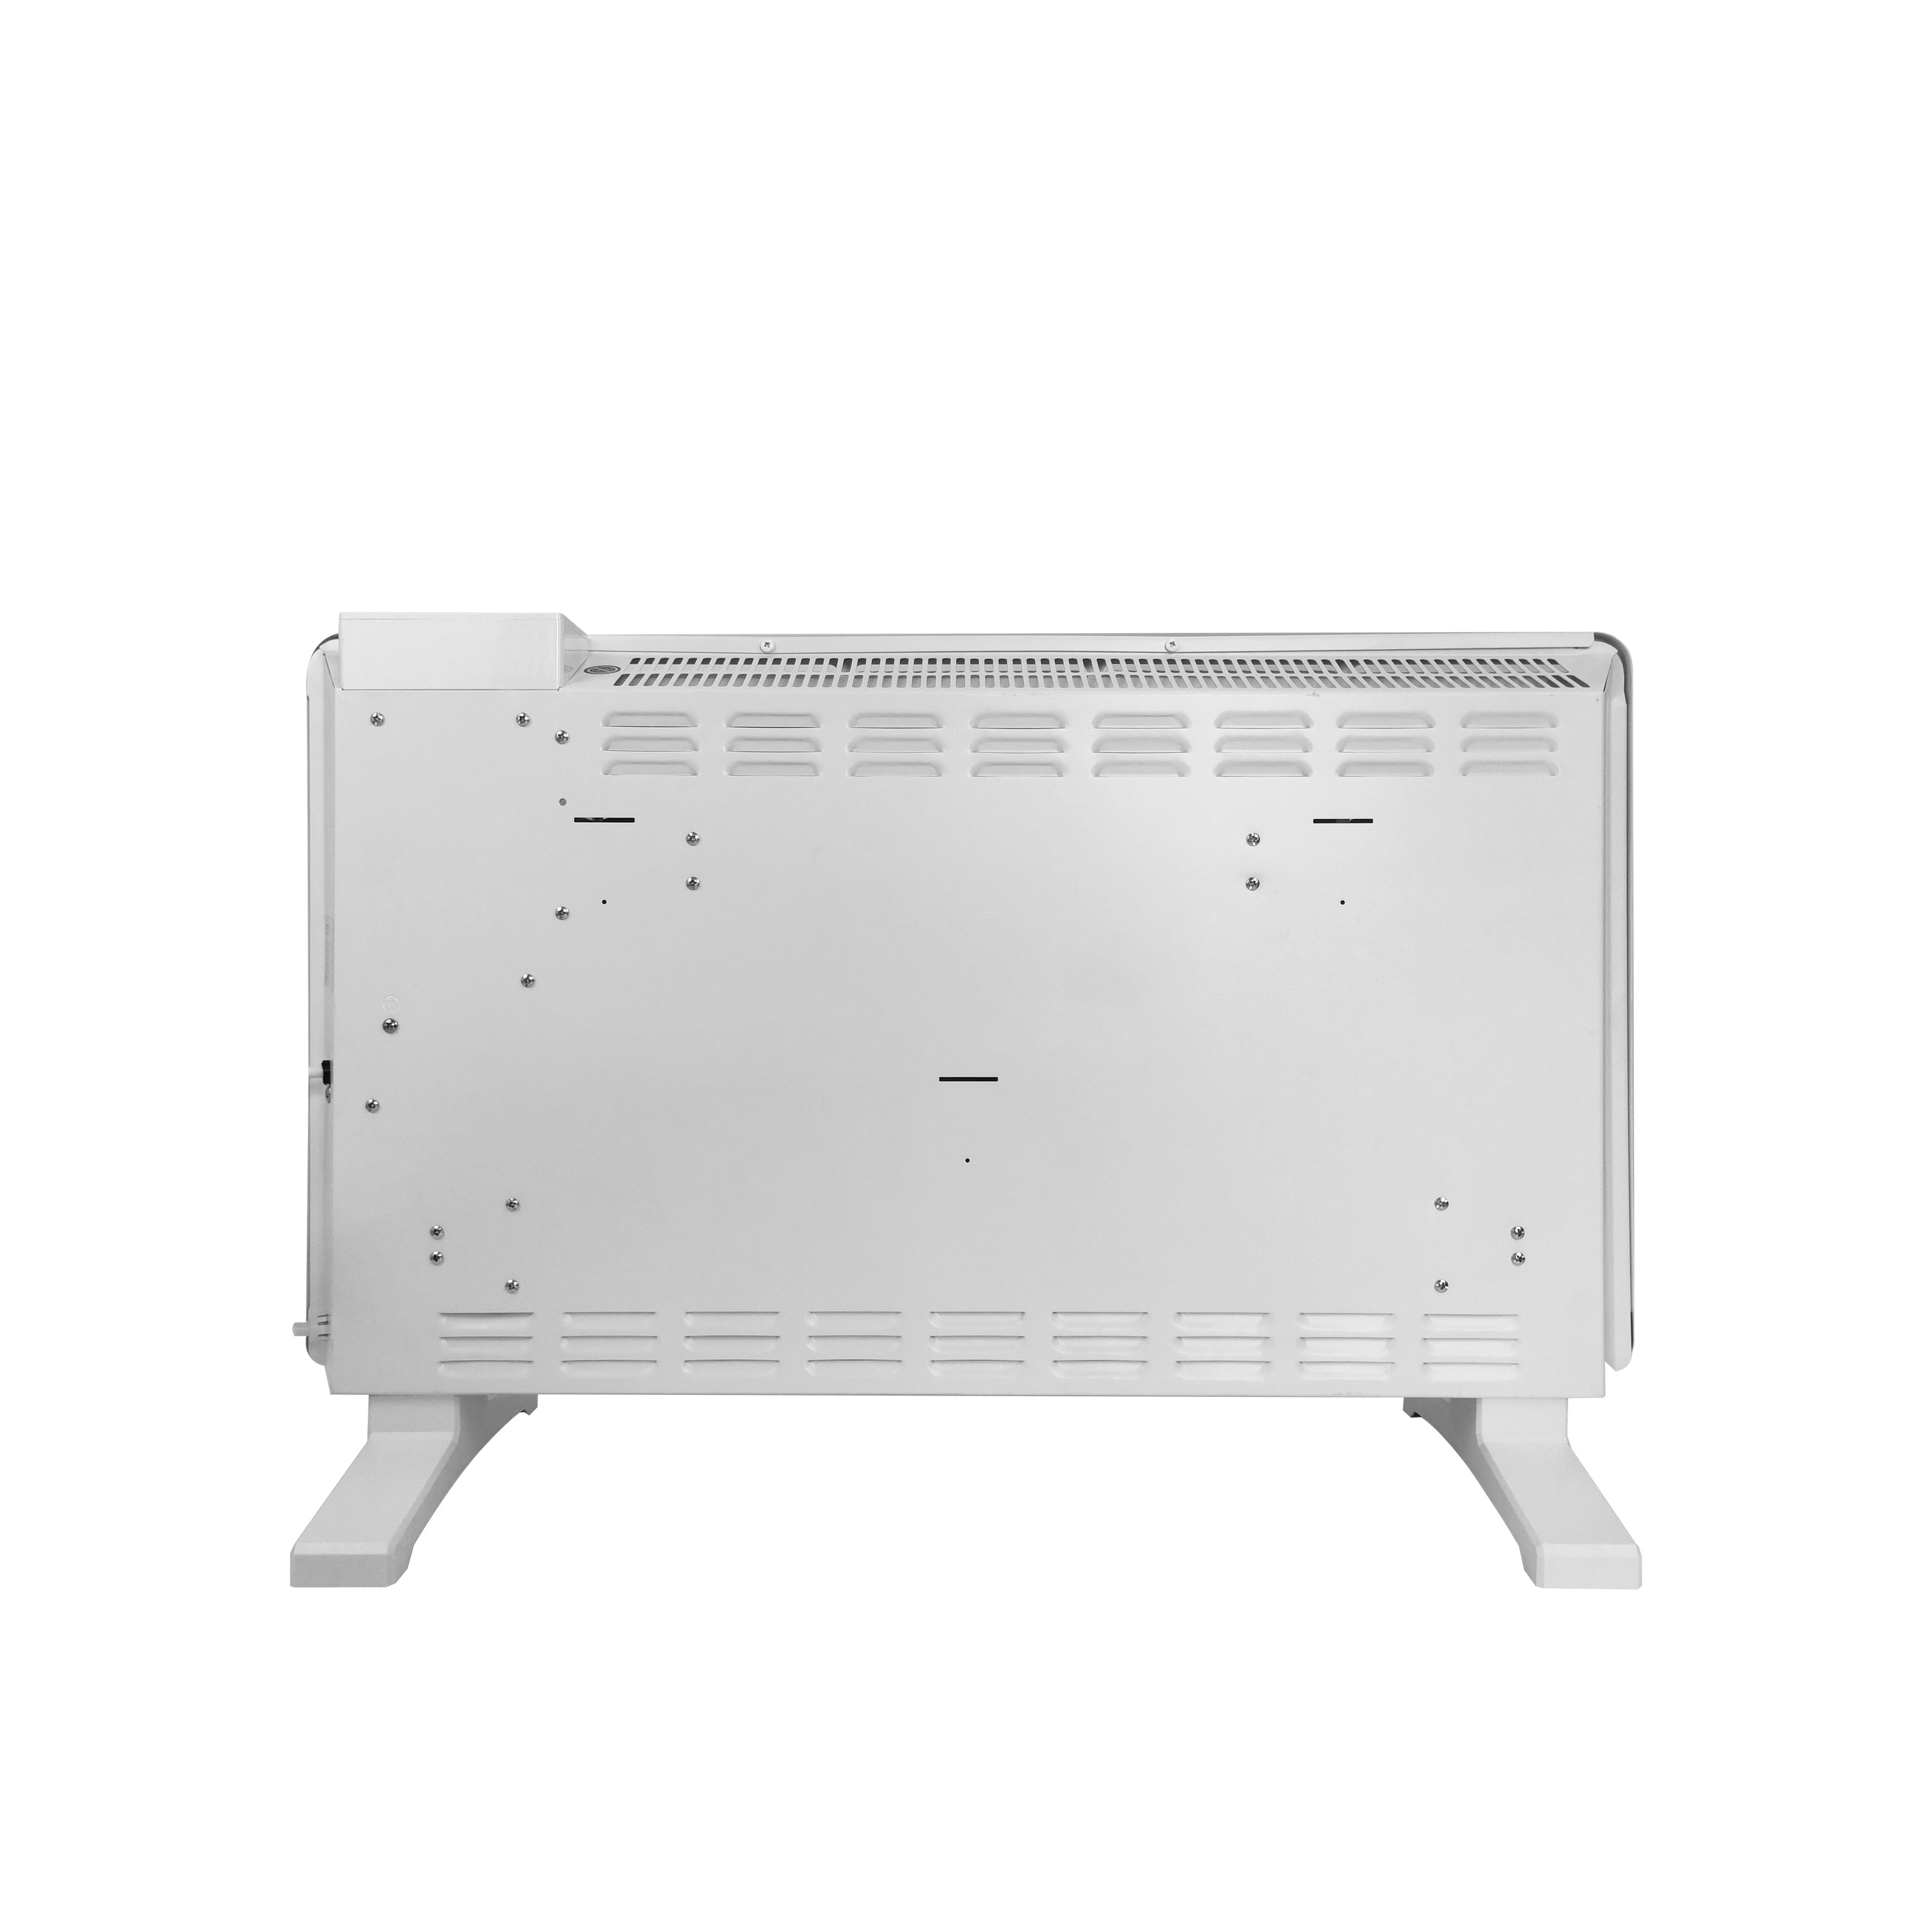 AMOS 2000W Wifi Electric Convector Panel Heater